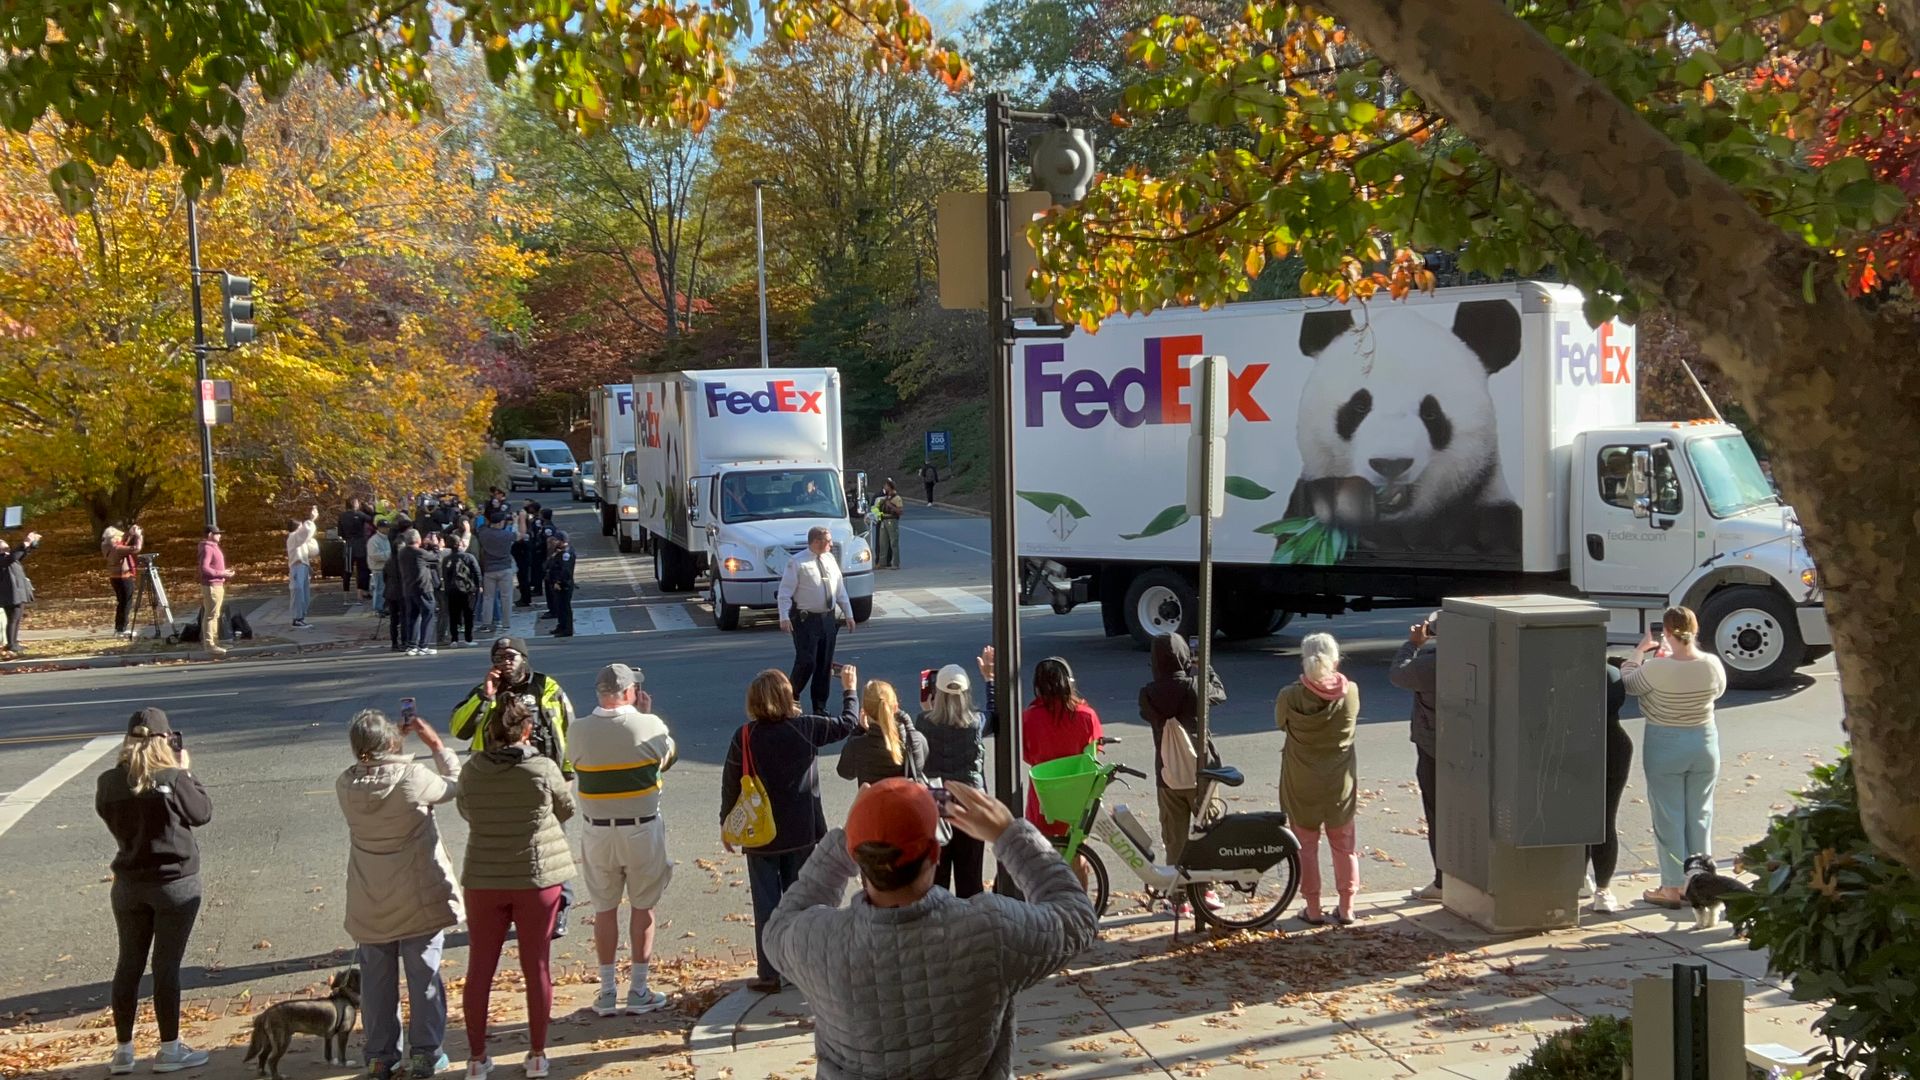 Pandas at the U.S. National Zoo, a symbol of goodwill between China and the U.S., are returning to China as diplomatic tensions grow.